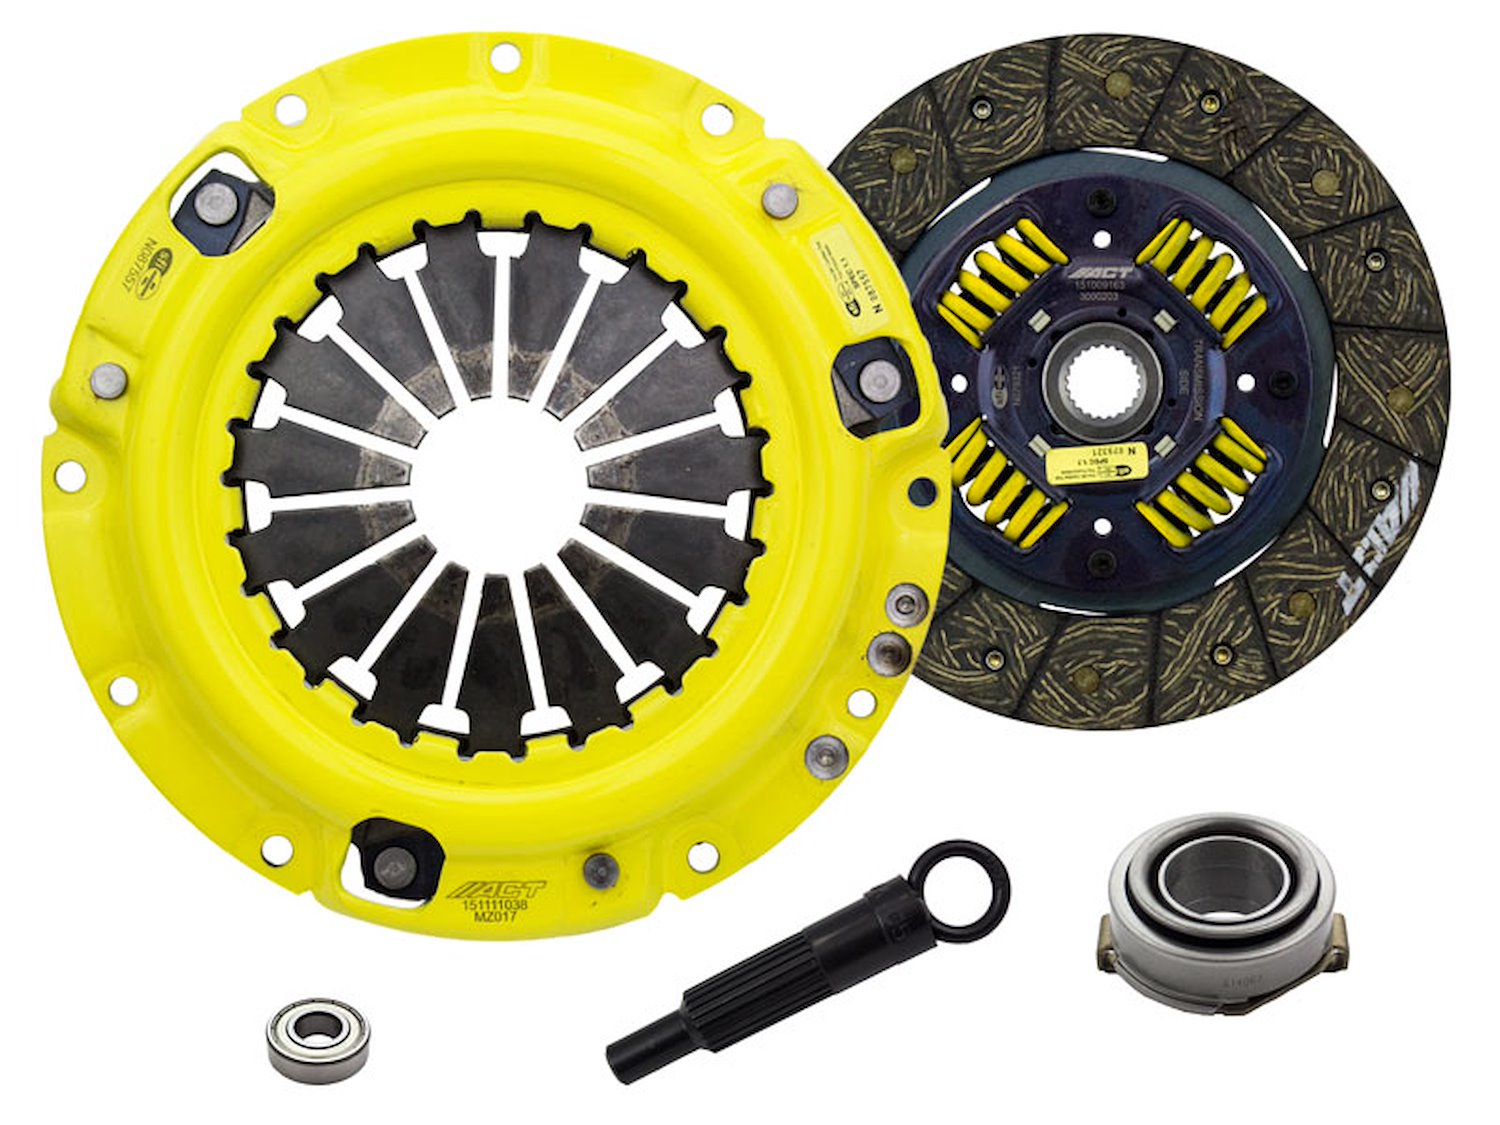 HD/Performance Street Sprung Transmission Clutch Kit Fits Select Multiple Makes/Models